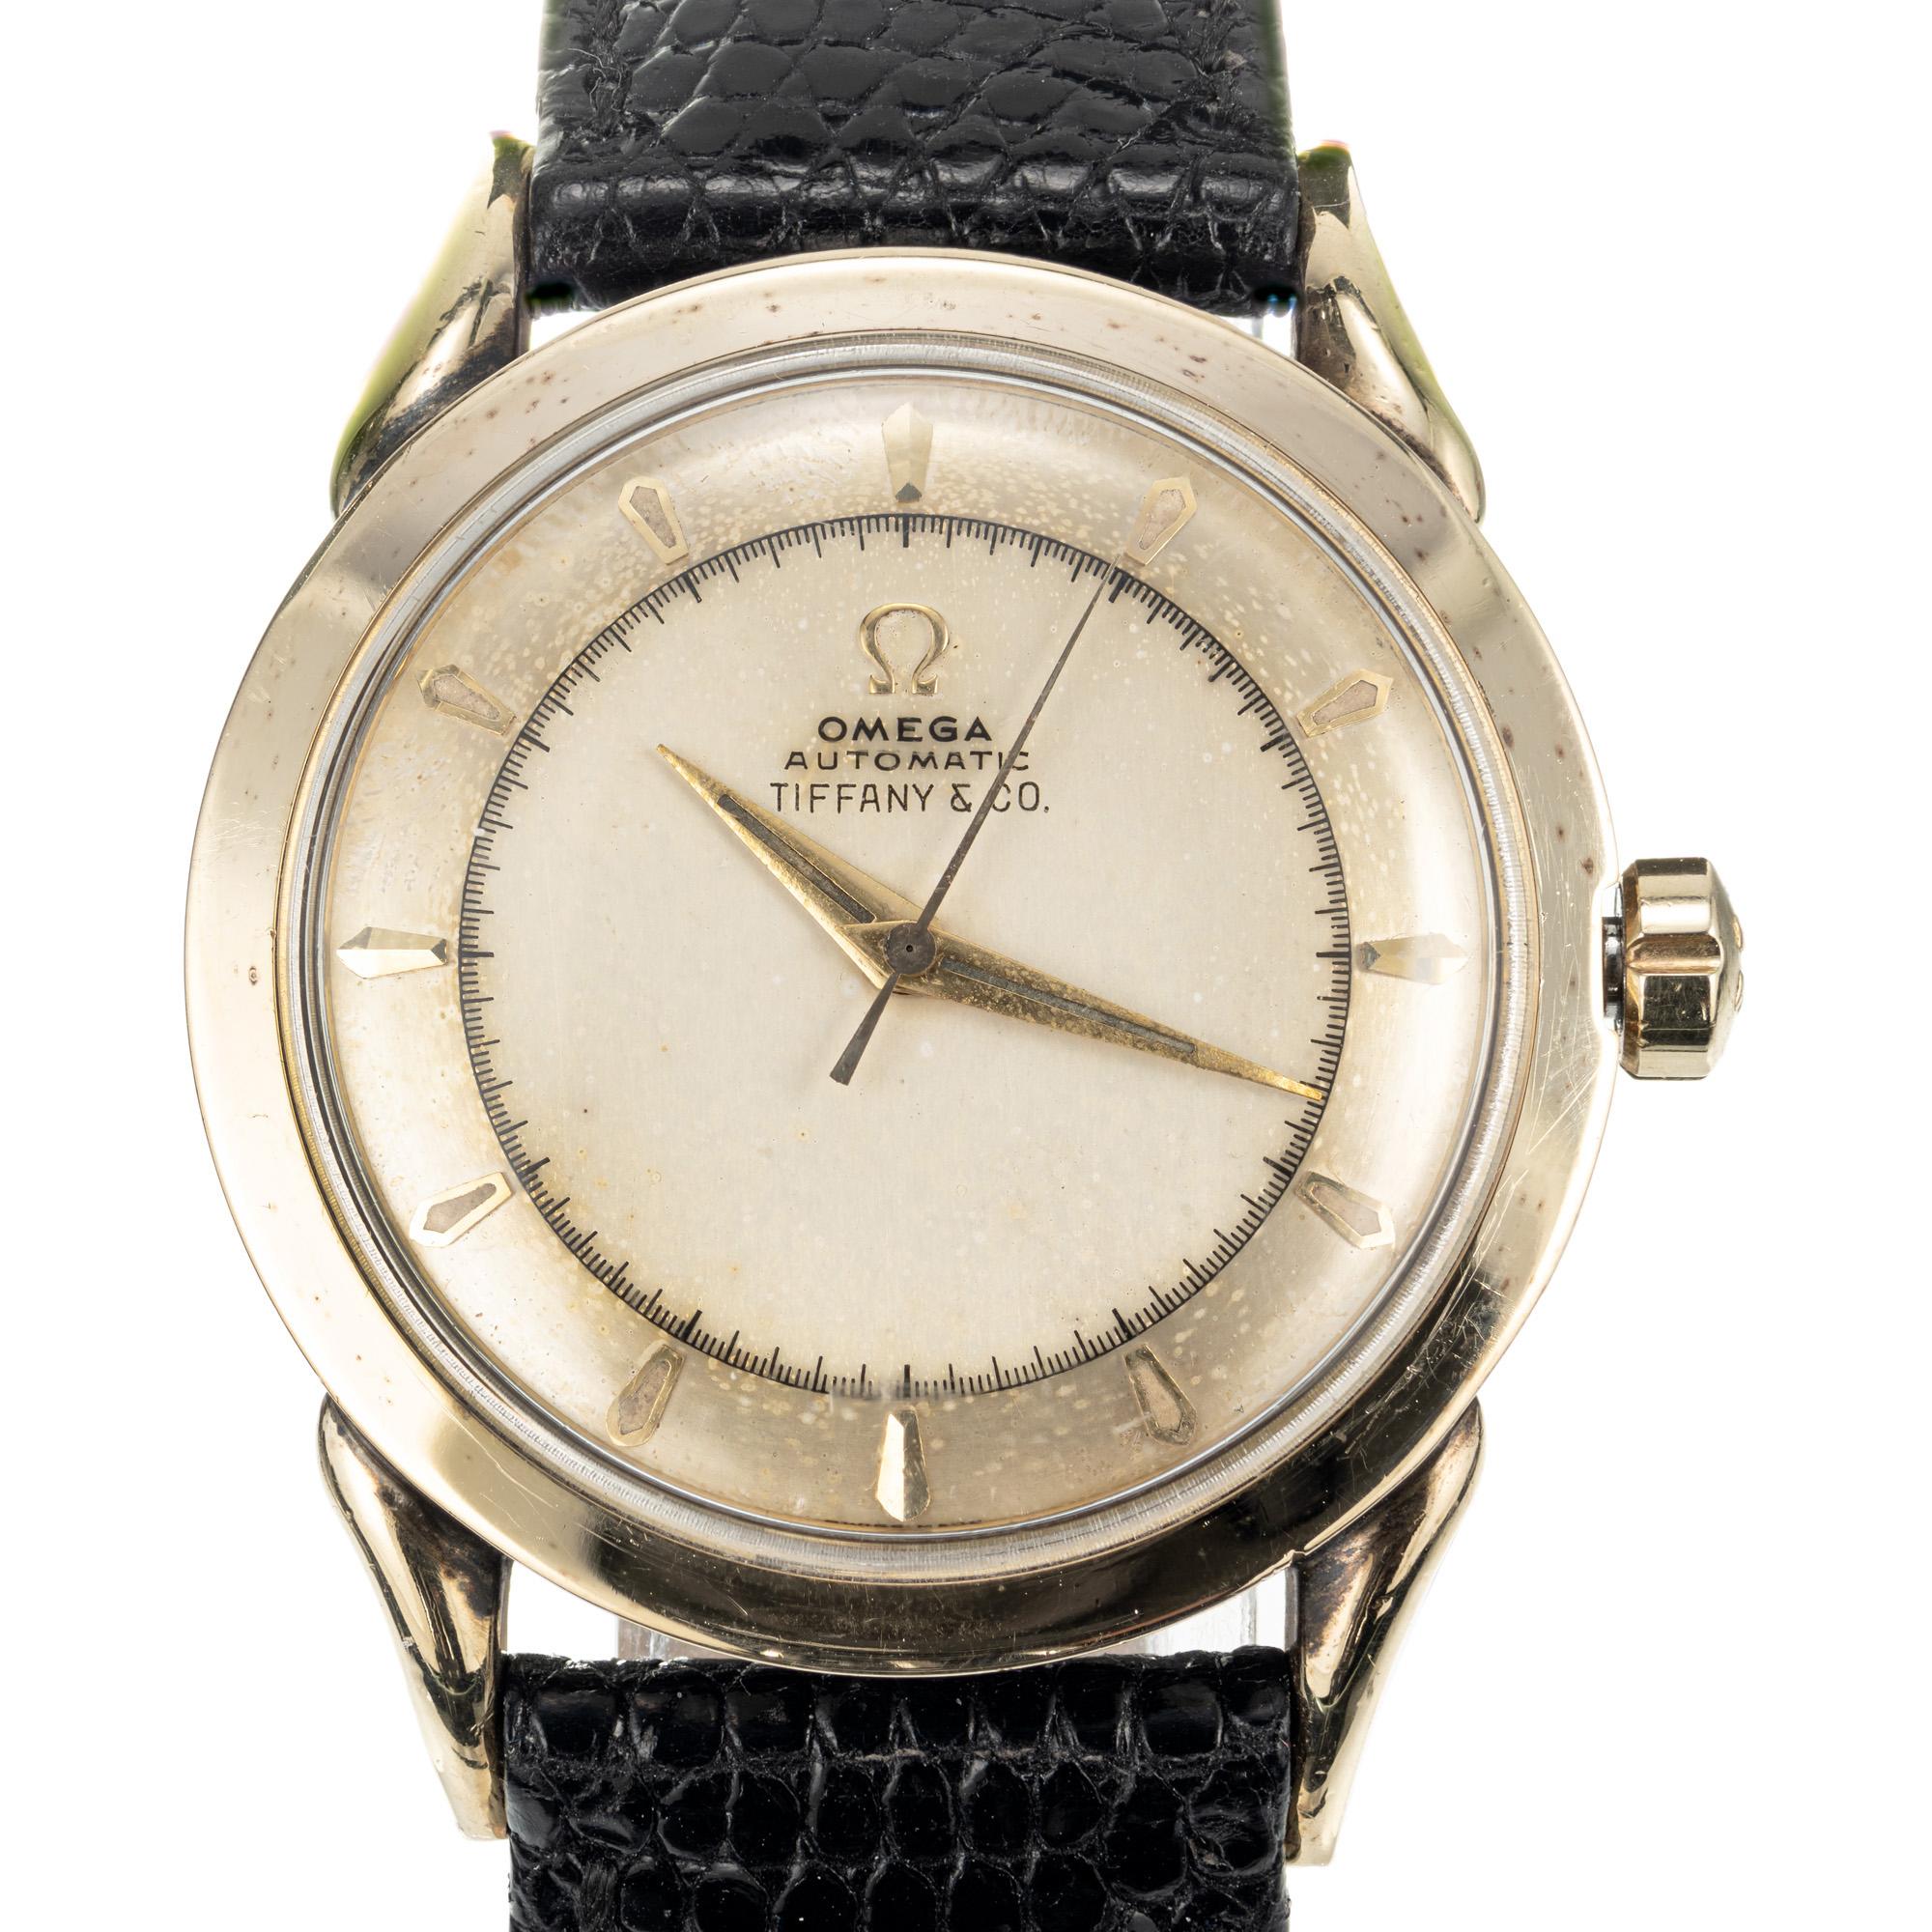 Omega Gilt Top and Stainless Steel Back Wristwatch, Retailed by Tiffany & Co,  Ref. 351, circa 1960s, with automatic bumper movement. 14 yellow gold bezel and stainless steel back.

Length: 42.51mm 
Width: 33mm 
40.0 grams
Strap width at case: 18mm